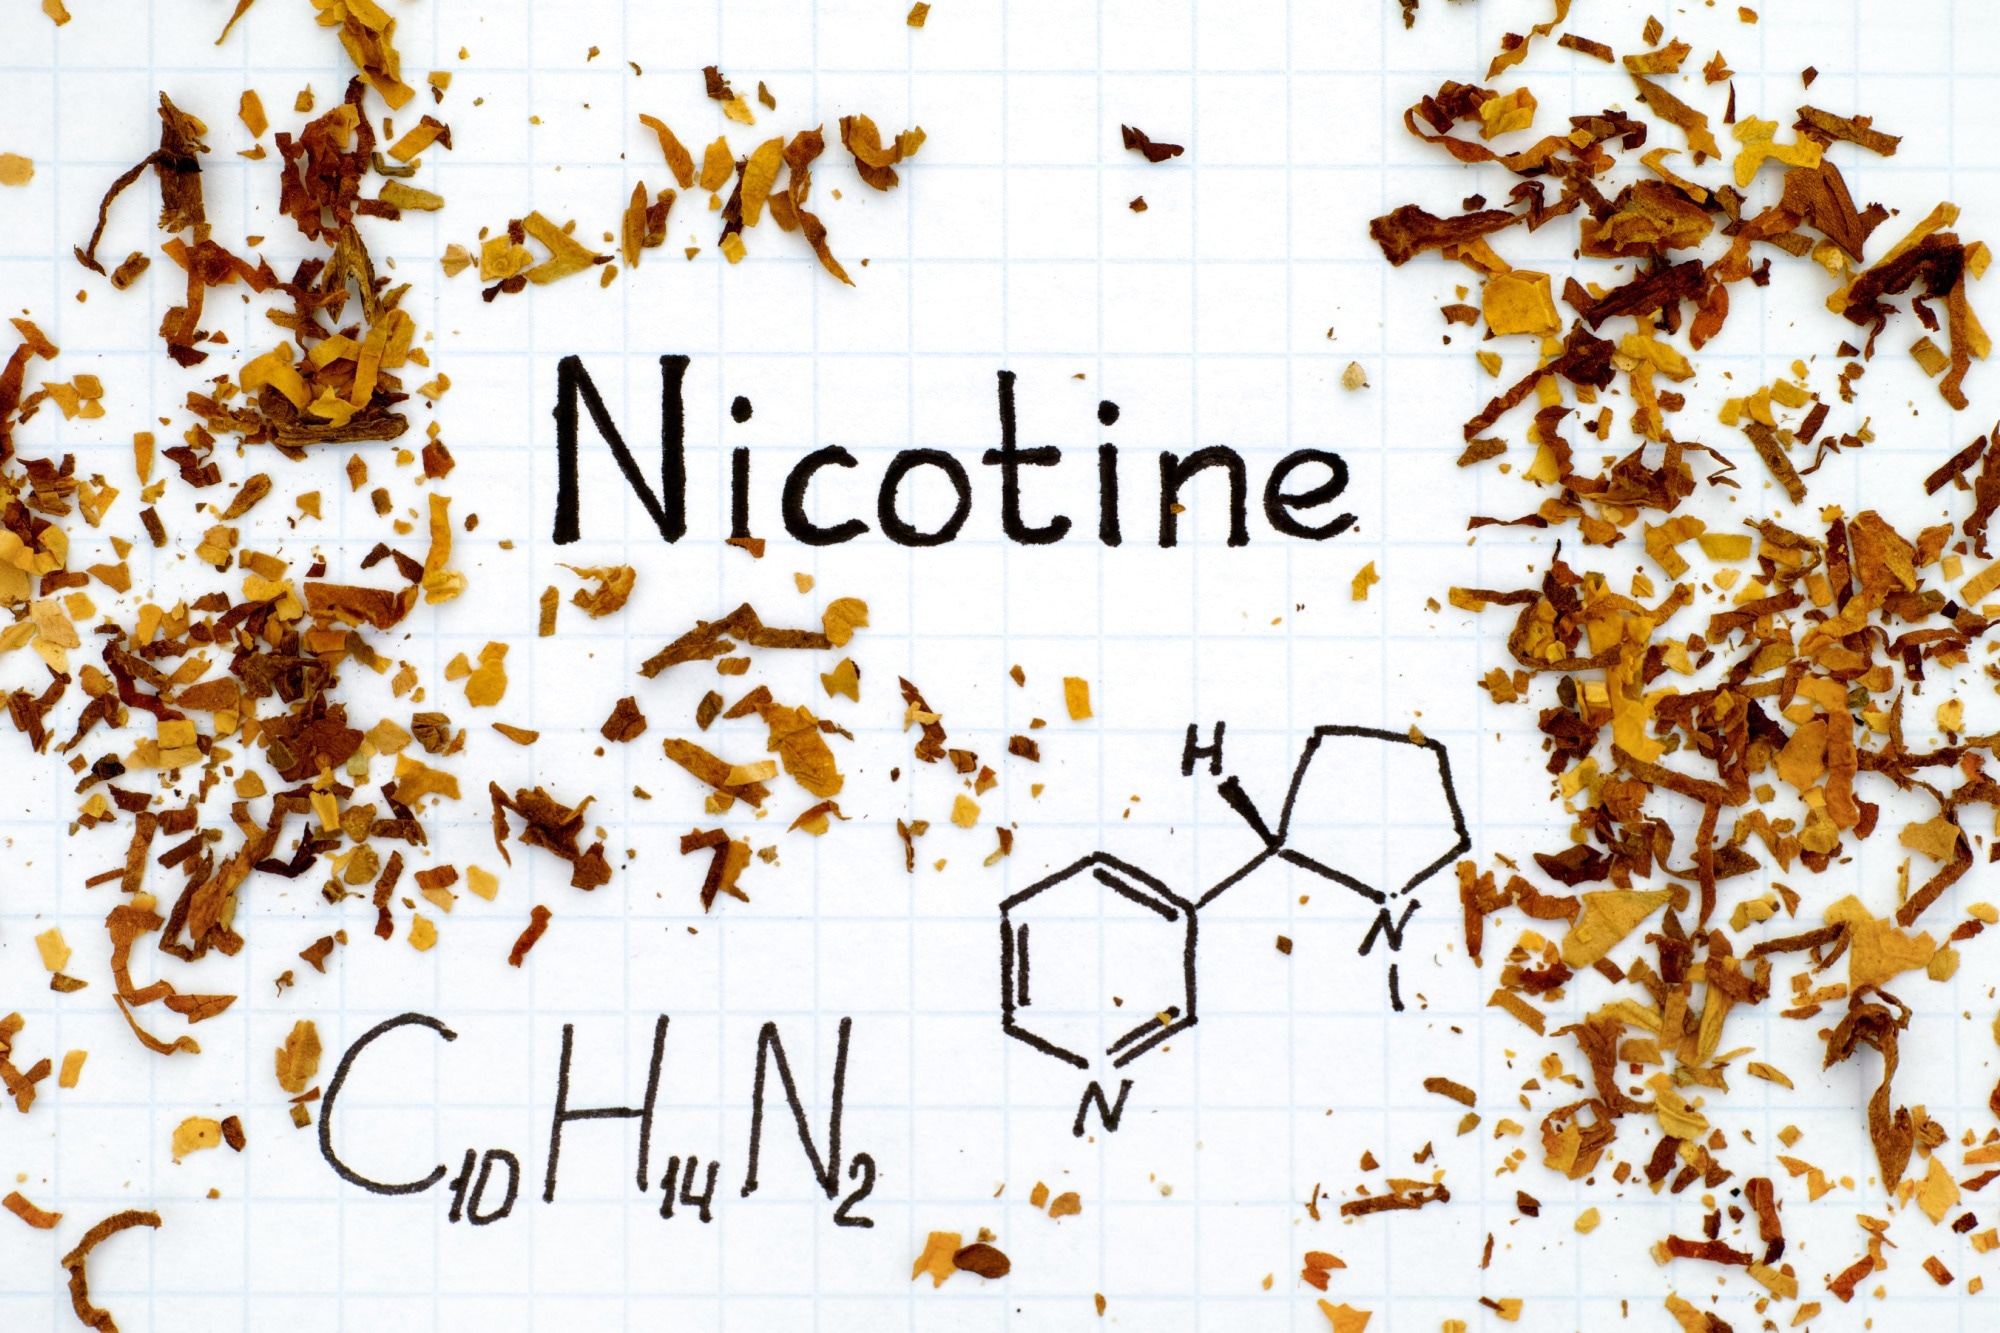 Researchers assess the cytoprotective activity of nicotine against COVID-19